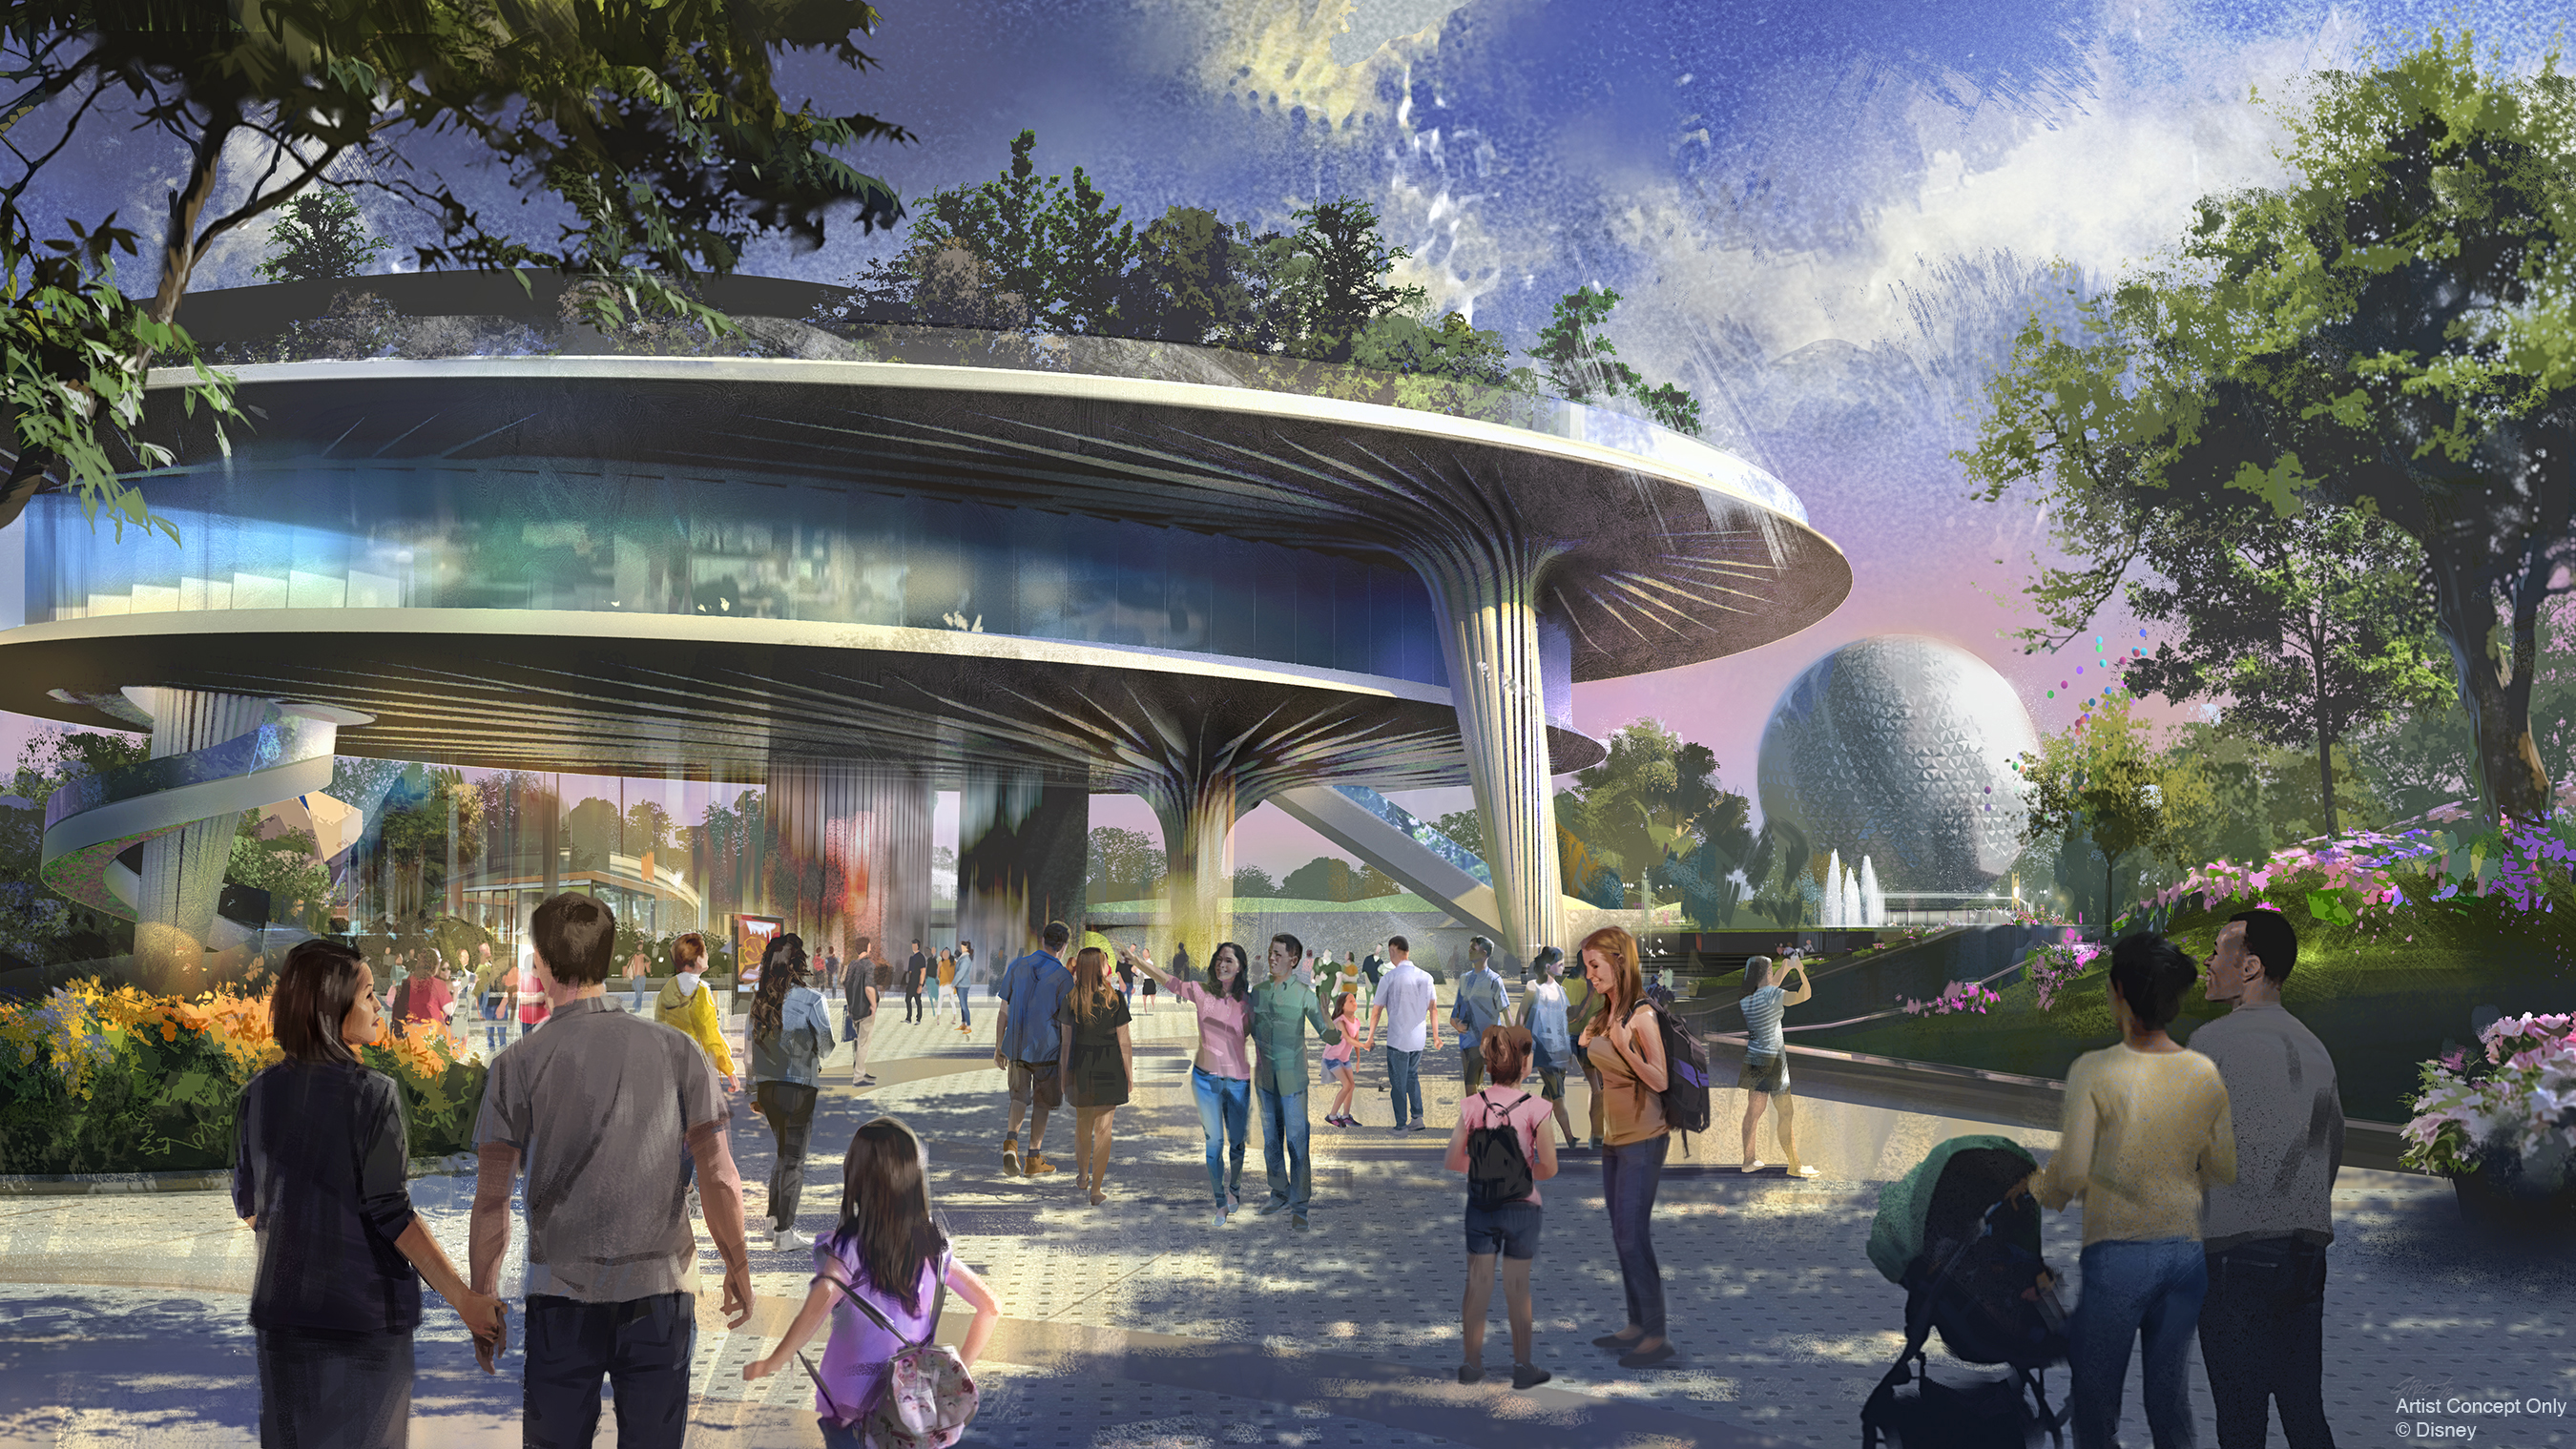 EPCOT Festival Center Likely to be Dramatically Altered or Cancelled